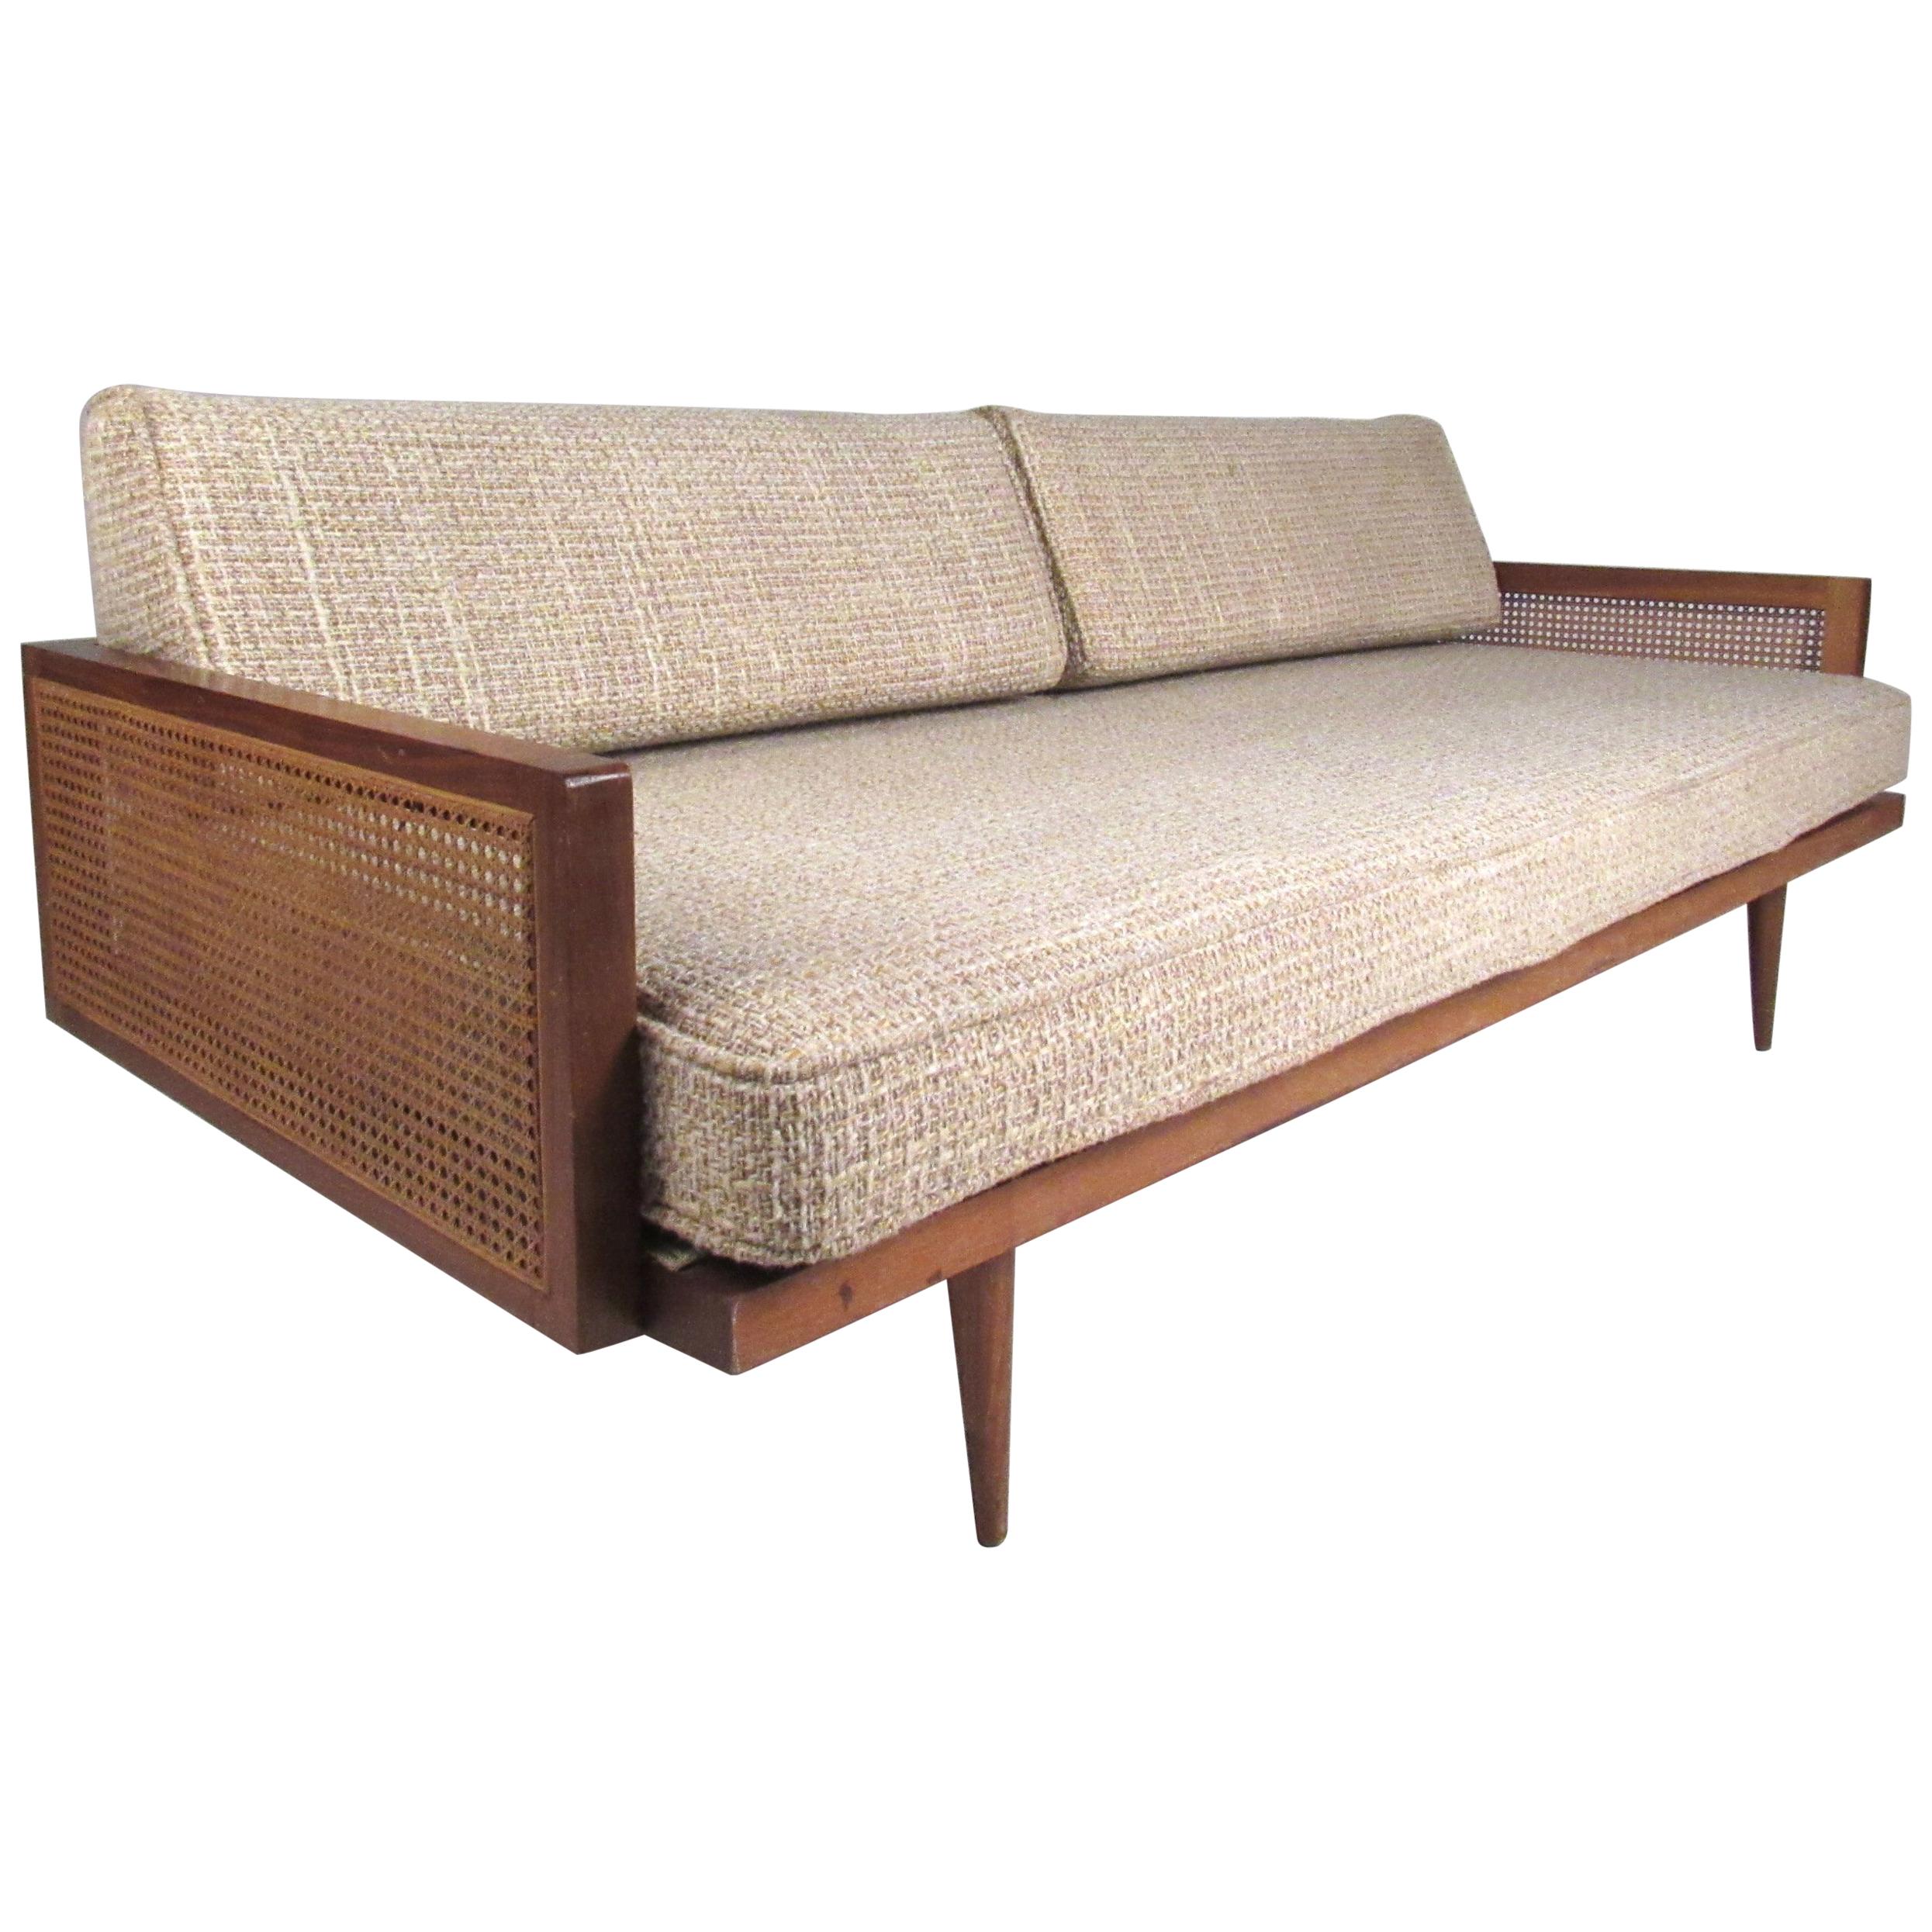 Midcentury Walnut and Cane Sofa or Daybed